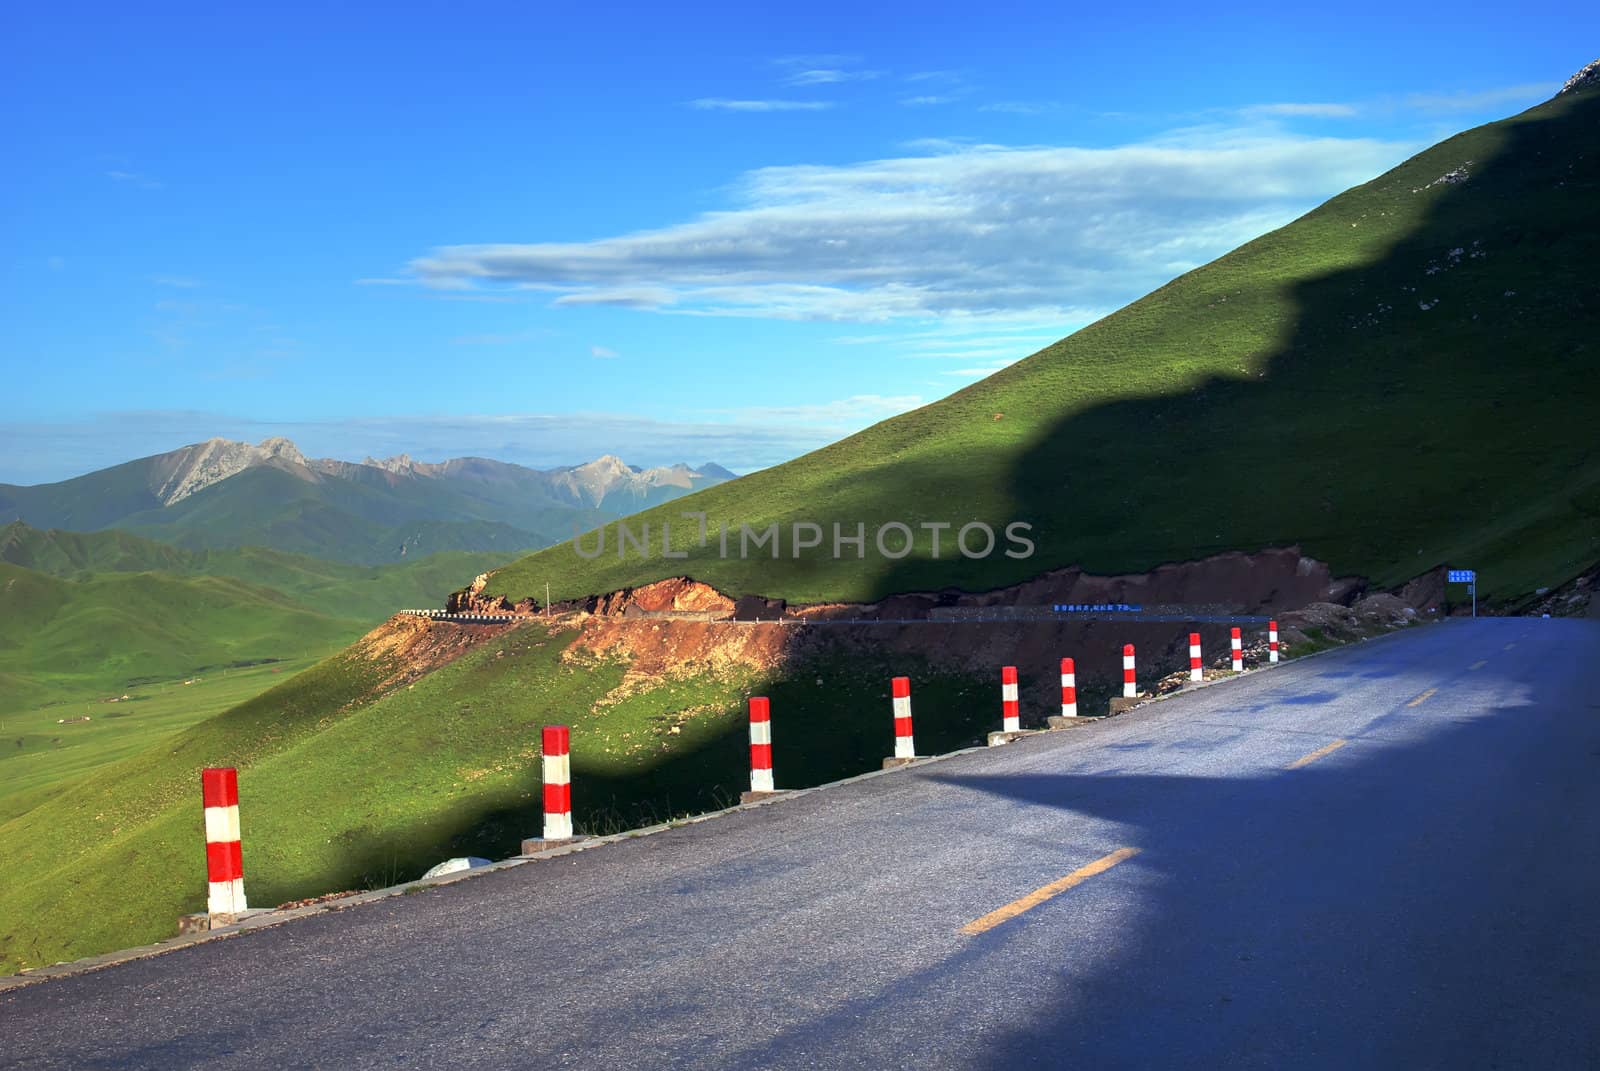 Taken in Gansu Province, China. This  road is leading to the Tibetan-inhabited areas in the mountains